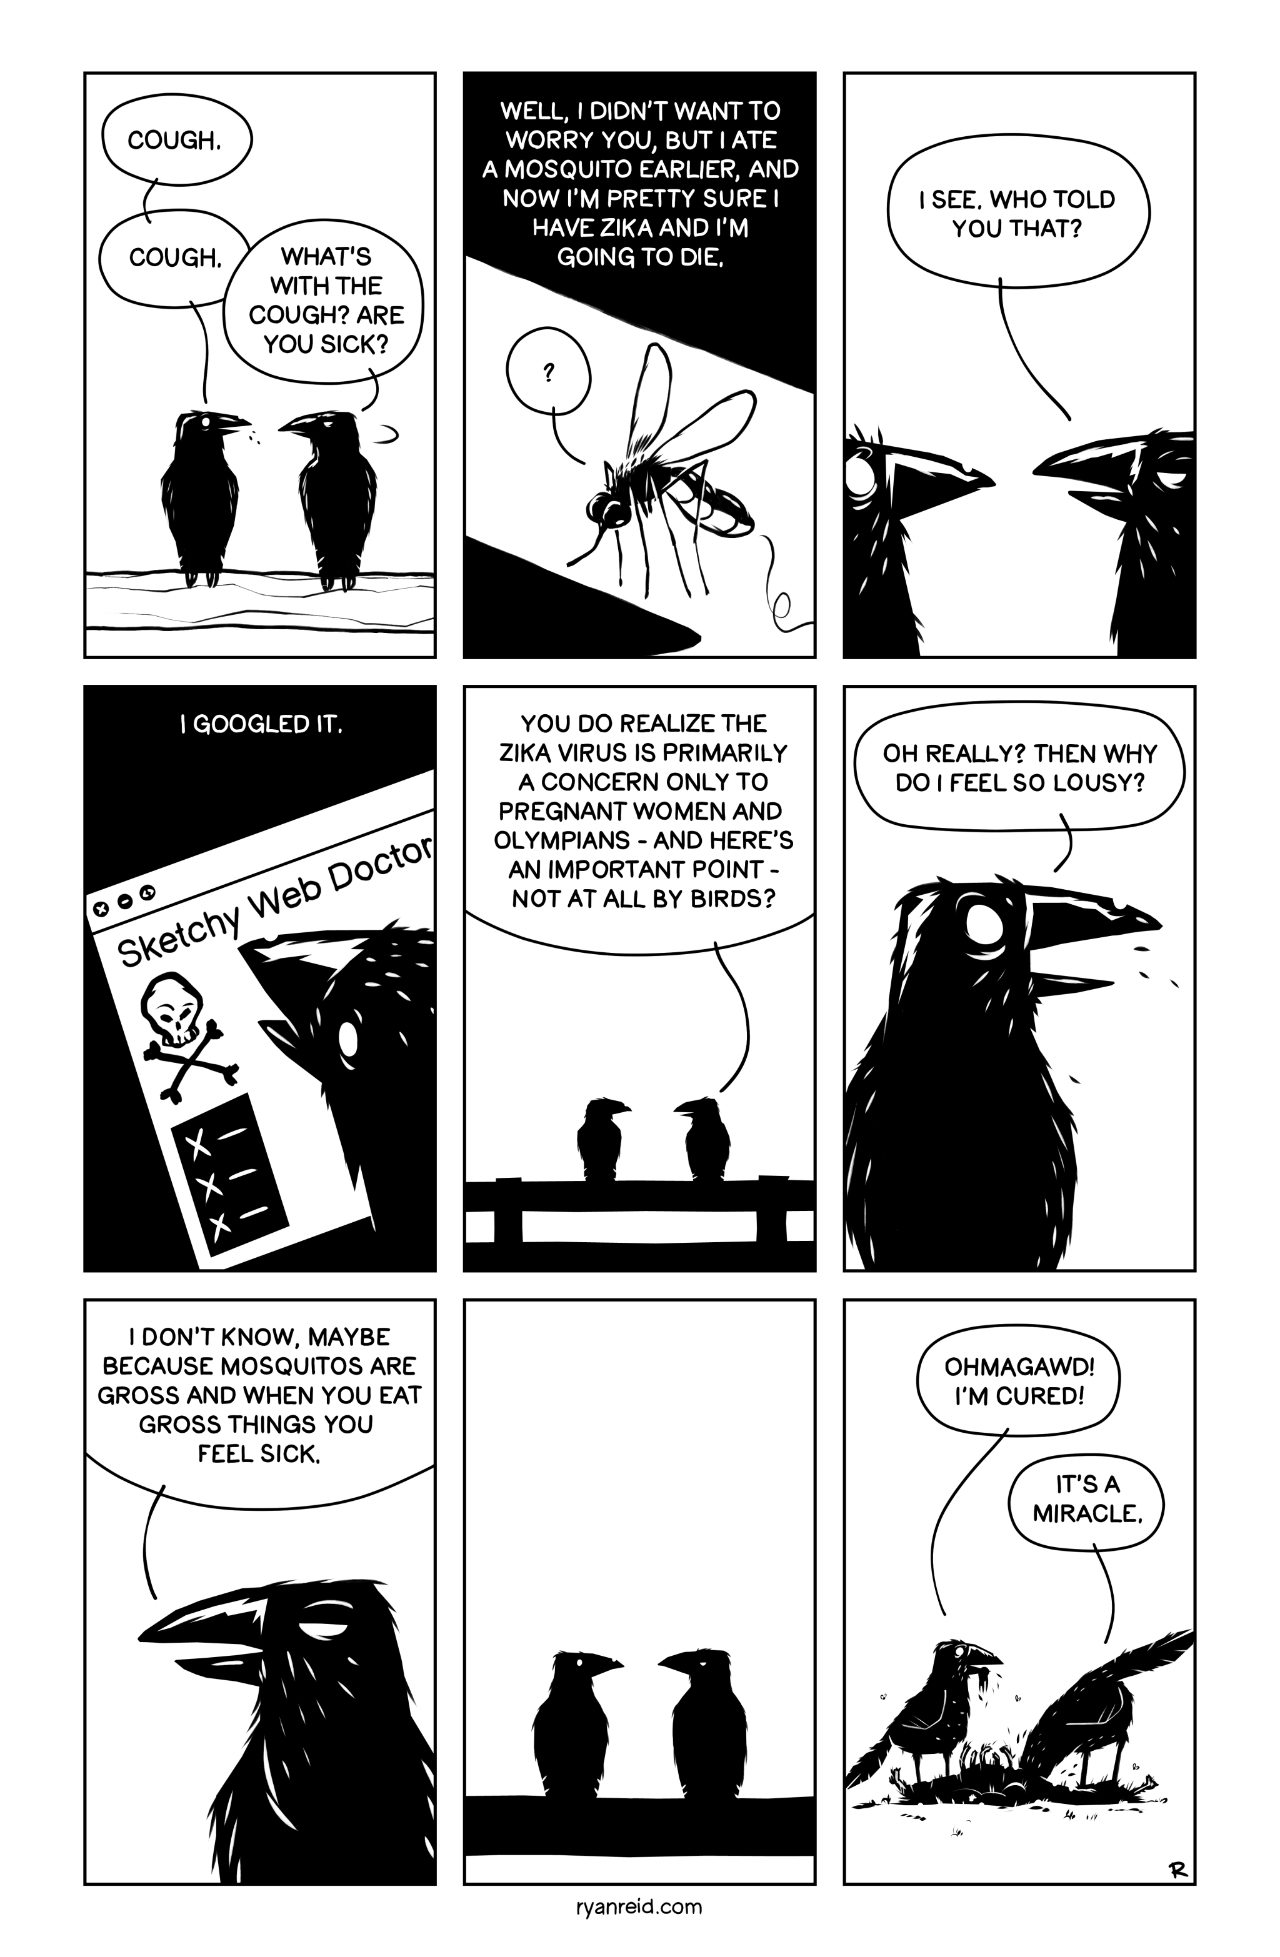 In this comic, the crows express their concerns about the Zika Virus.